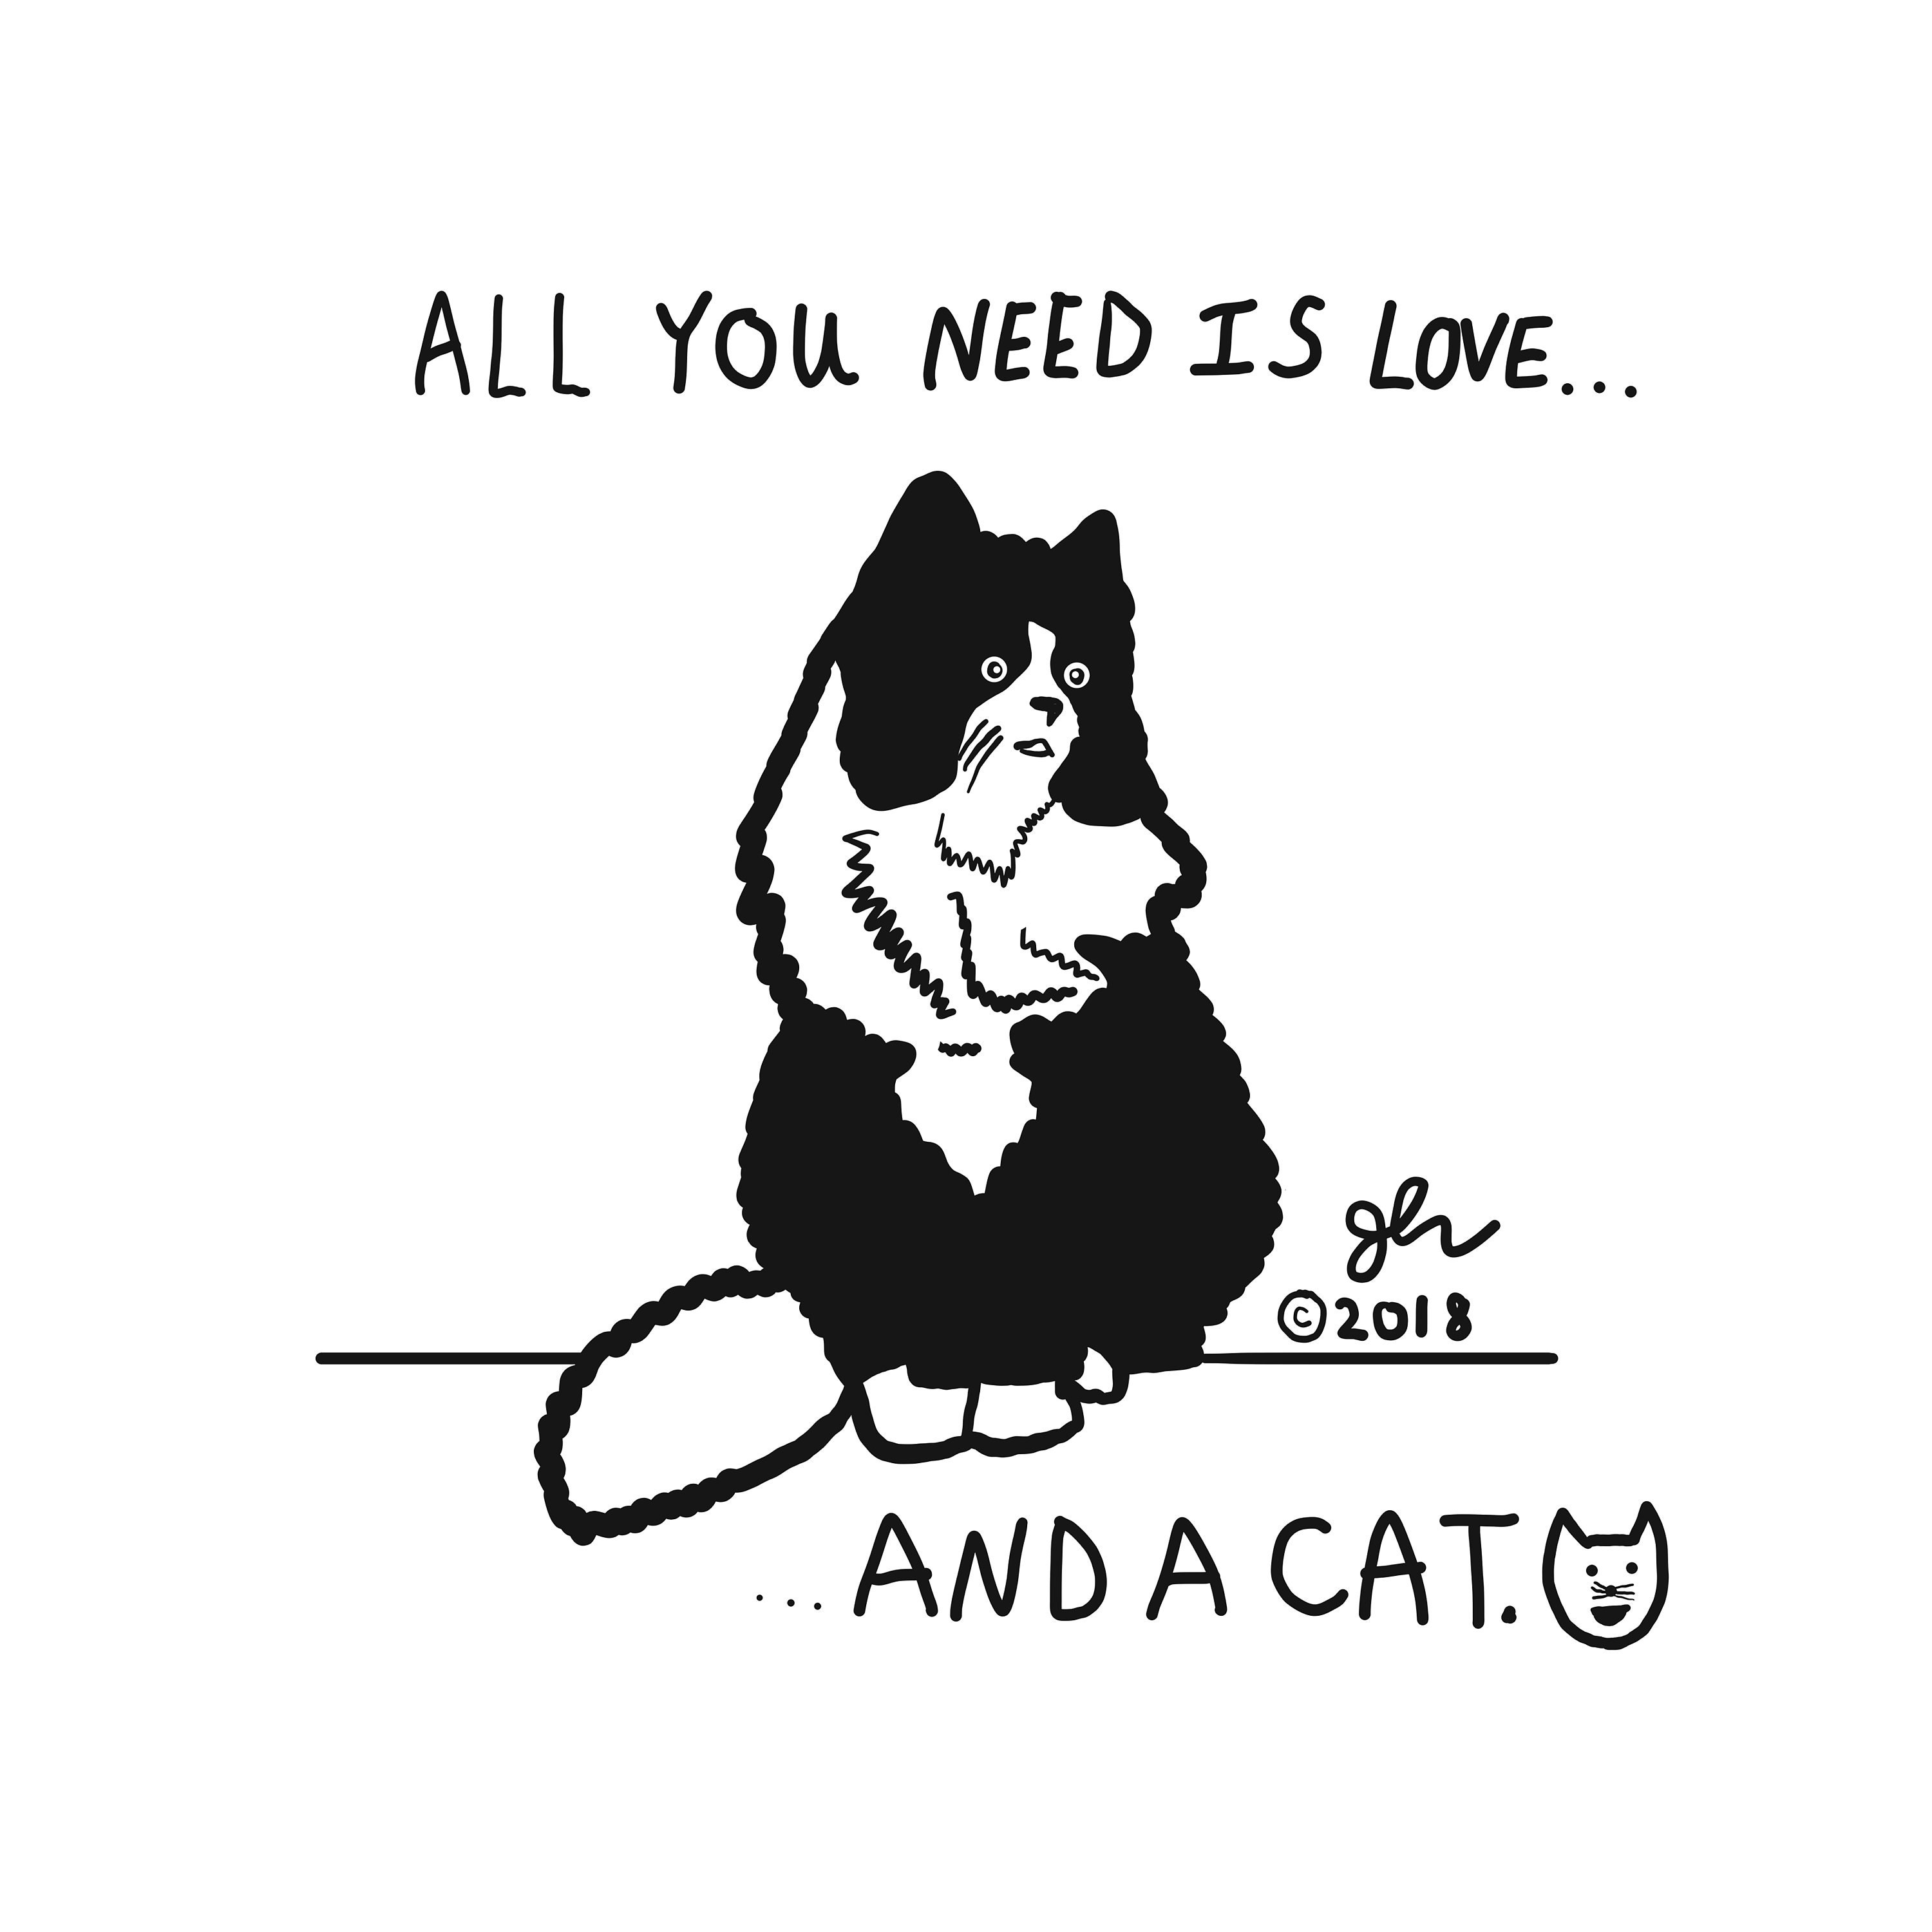 All You Need Is Love And A Cat Shirt Humor Cats Animal Lovers Vegan Vegetarian Xvx Punk Tshirt